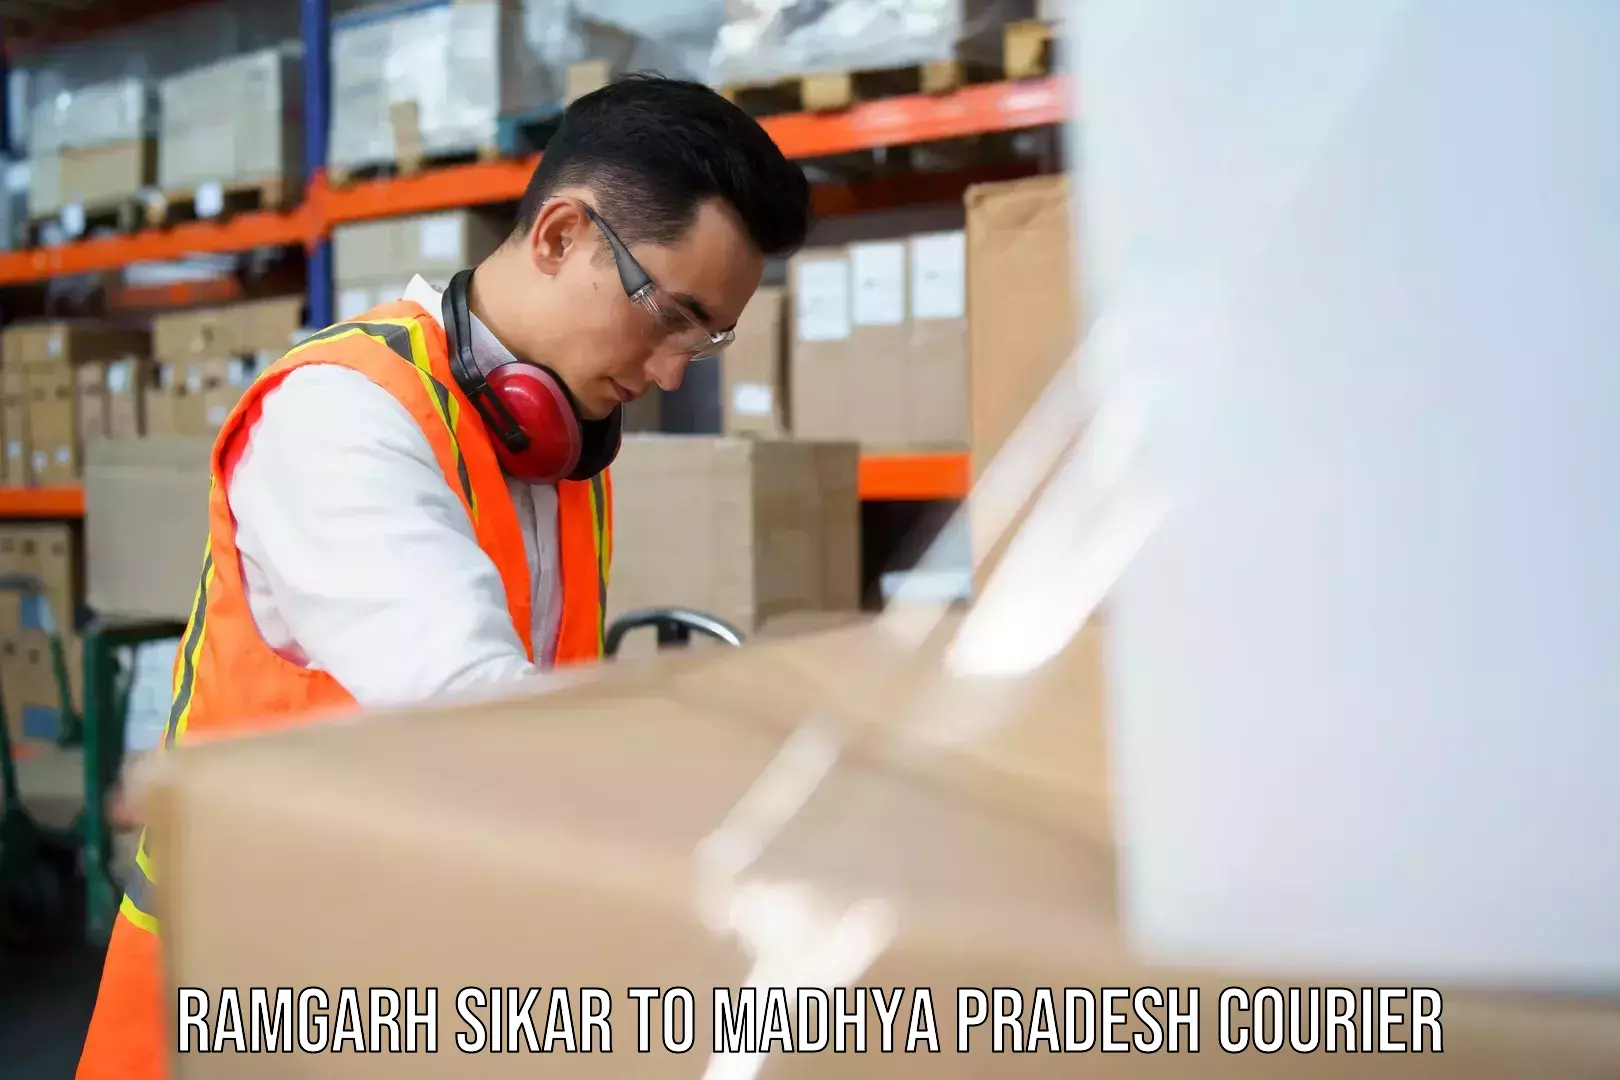 Professional delivery solutions Ramgarh Sikar to Gwalior